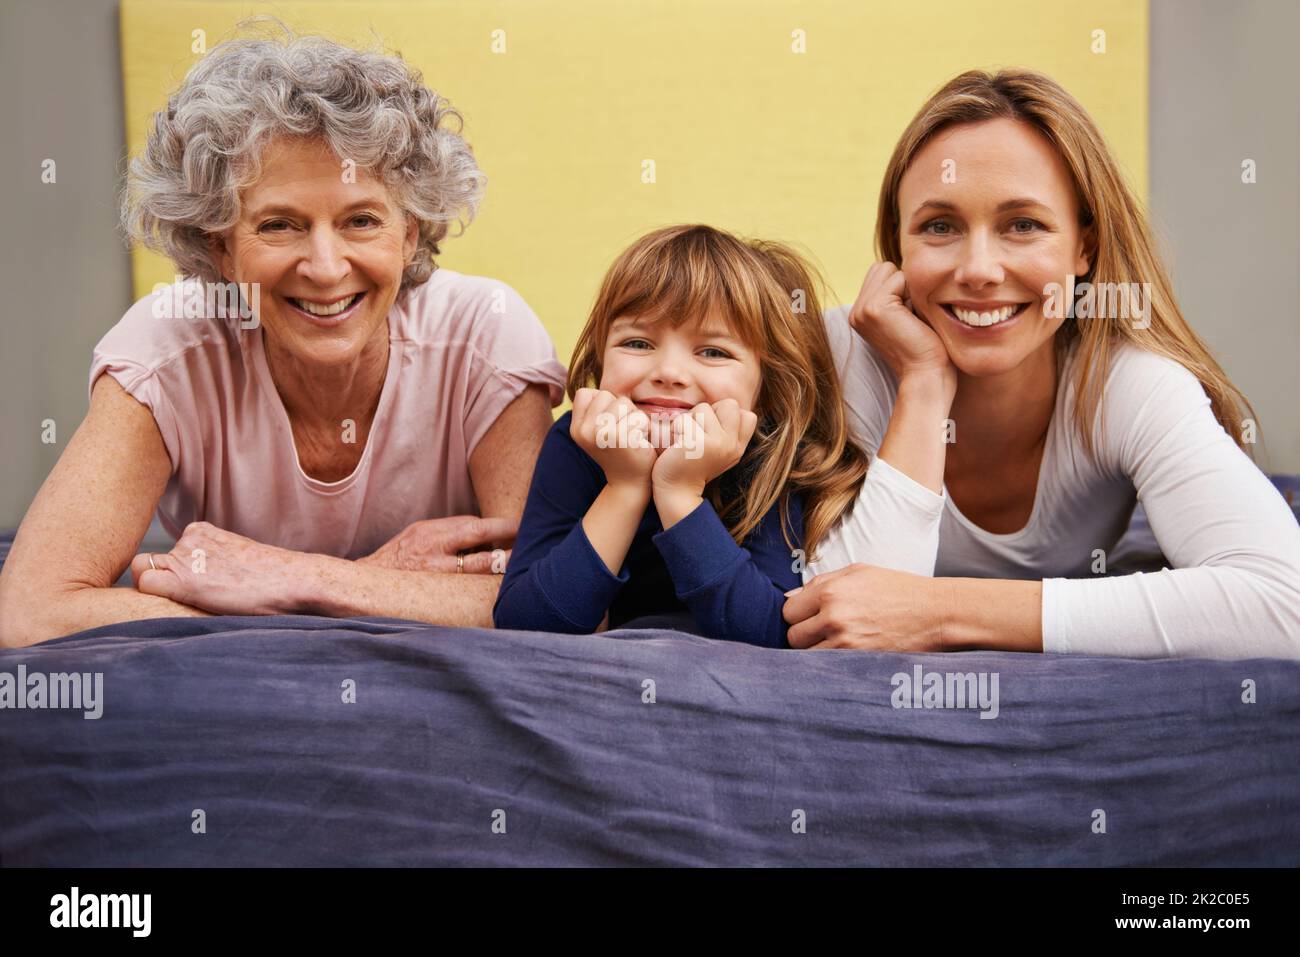 Making time to bond as a family. Portrait of a little girl and her mother and grandmother lying on a bed. Stock Photo